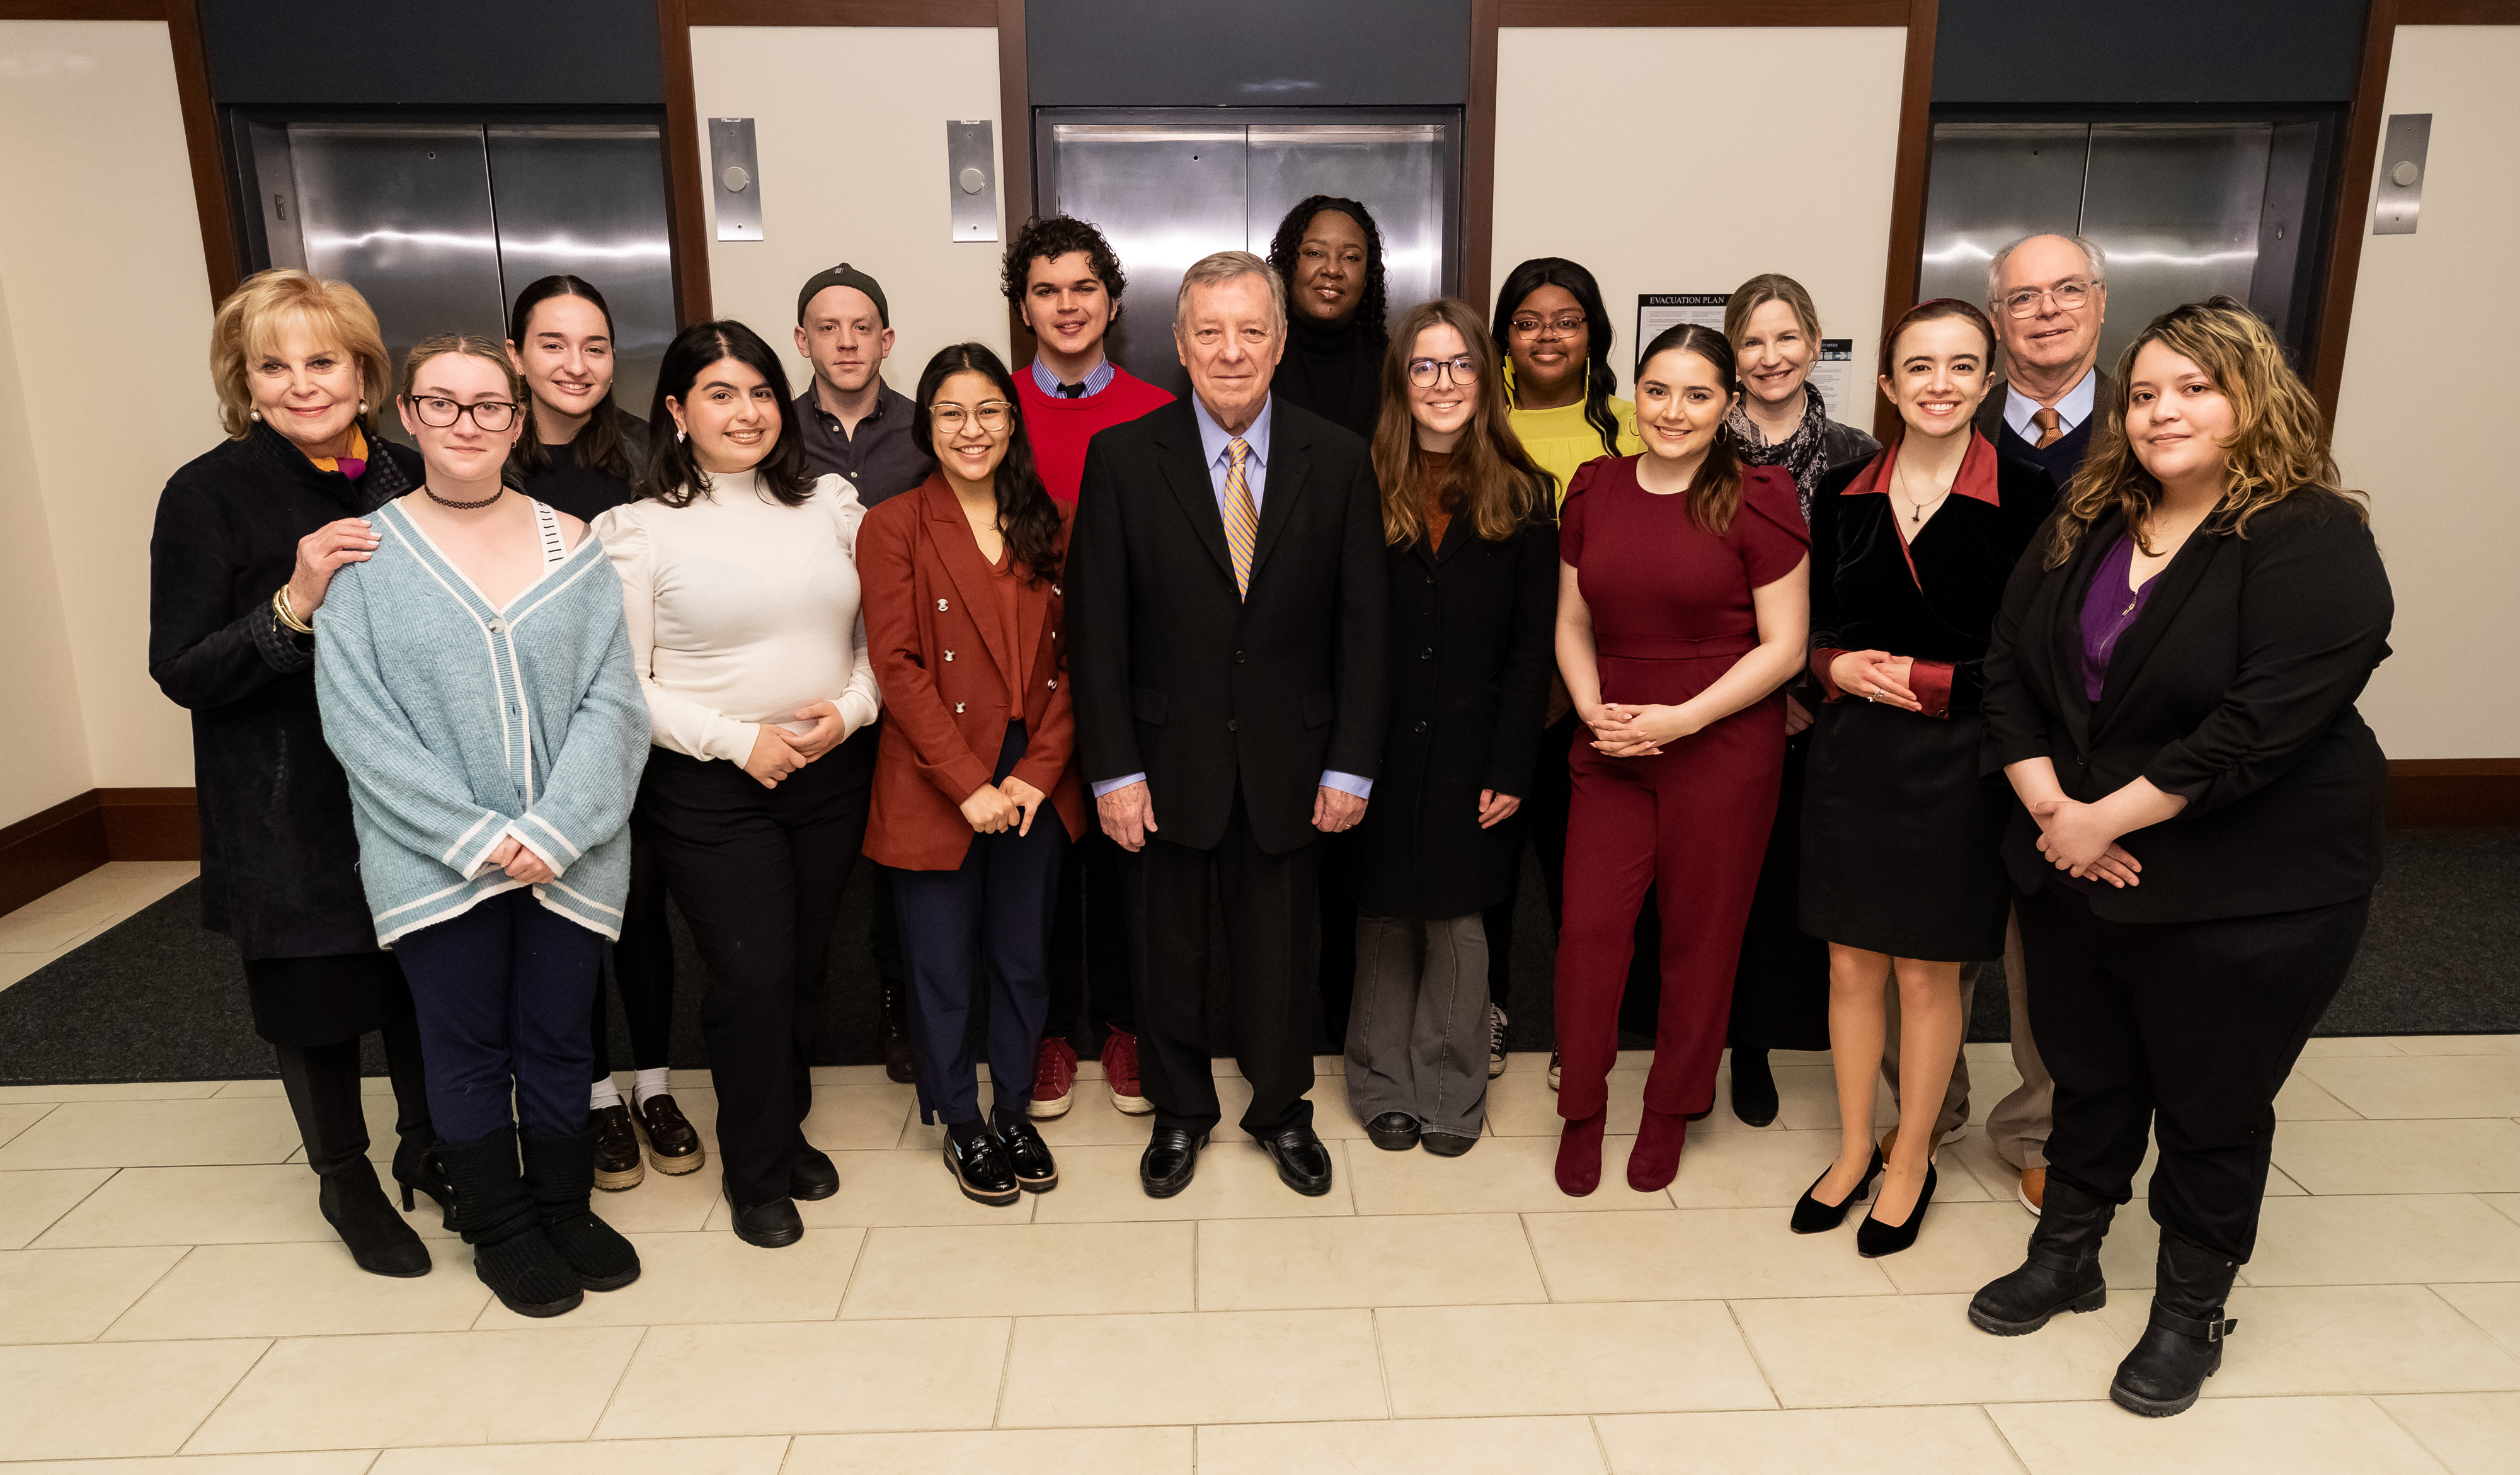 Group Photo with Dick Durbin, students and CJIE directors